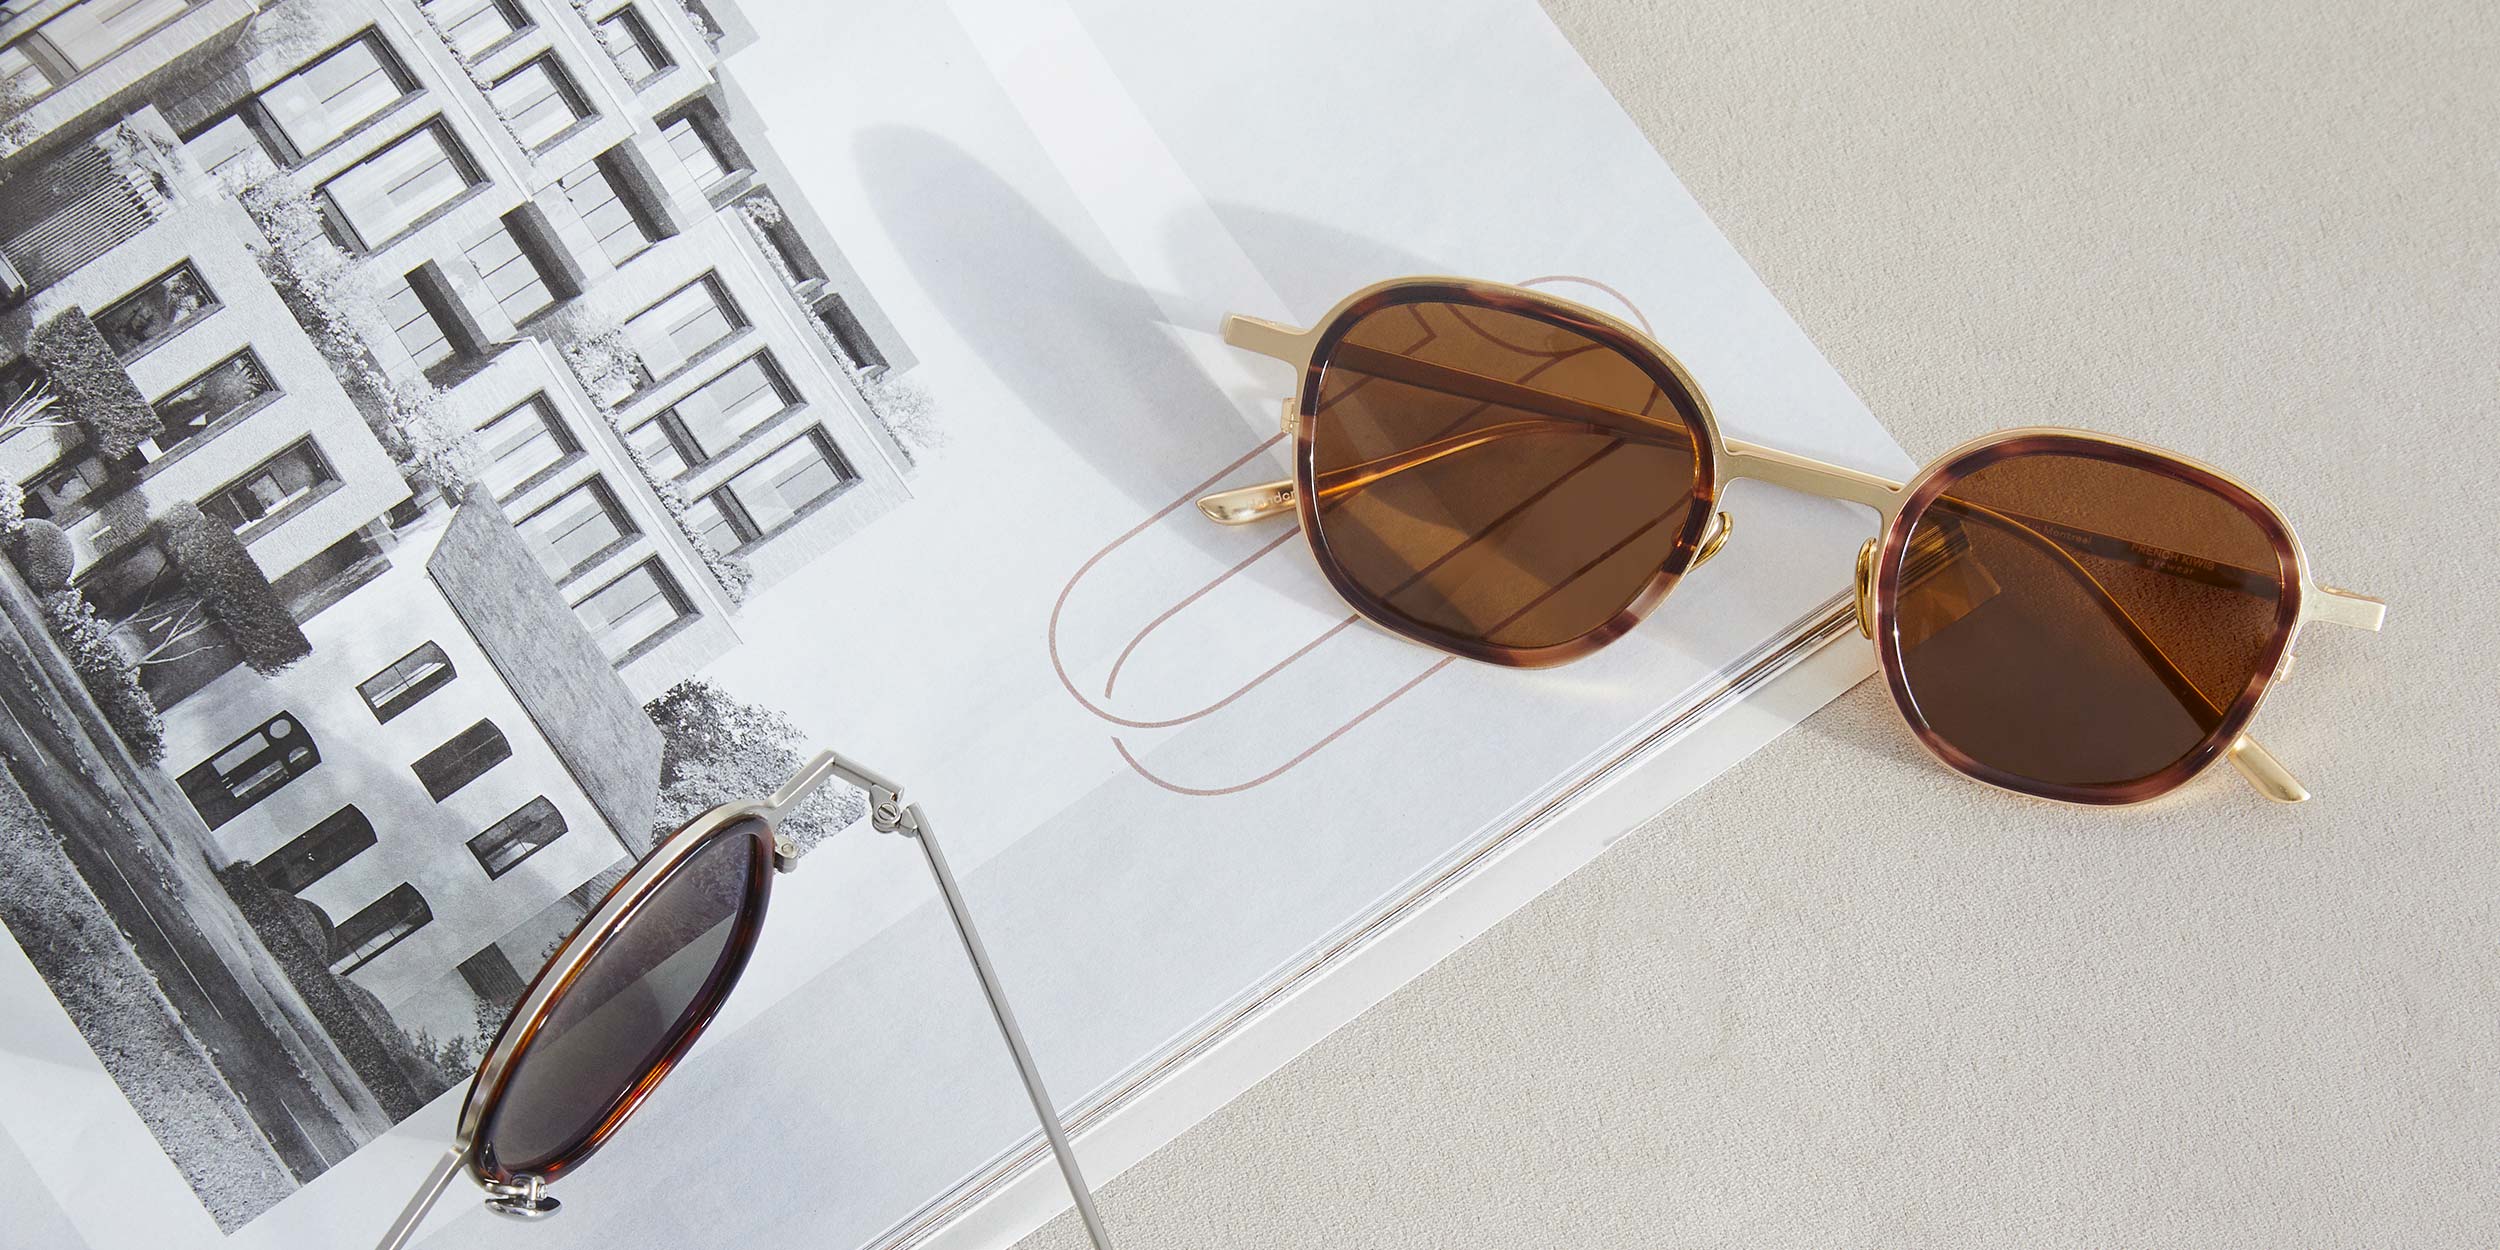 Photo Details of Thierry Sun Brown Marble & Mat Gold Sun Glasses in a room